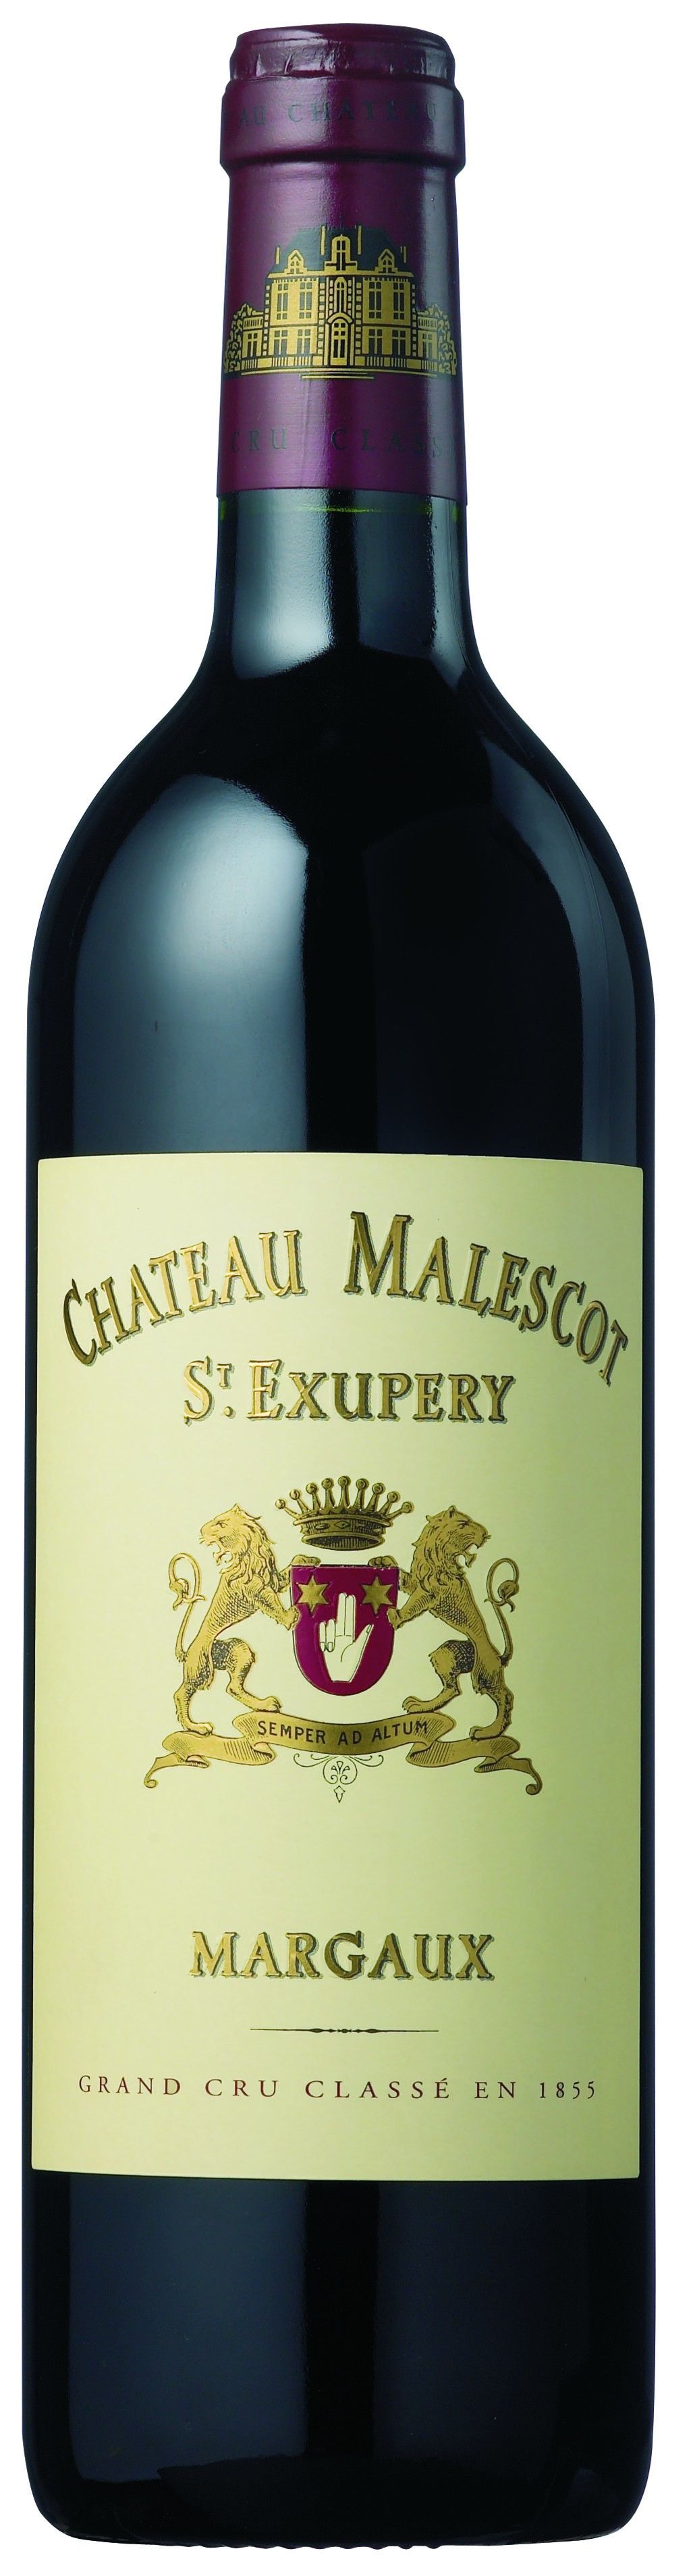 Chateau Malescot-St-Exupery, 2012